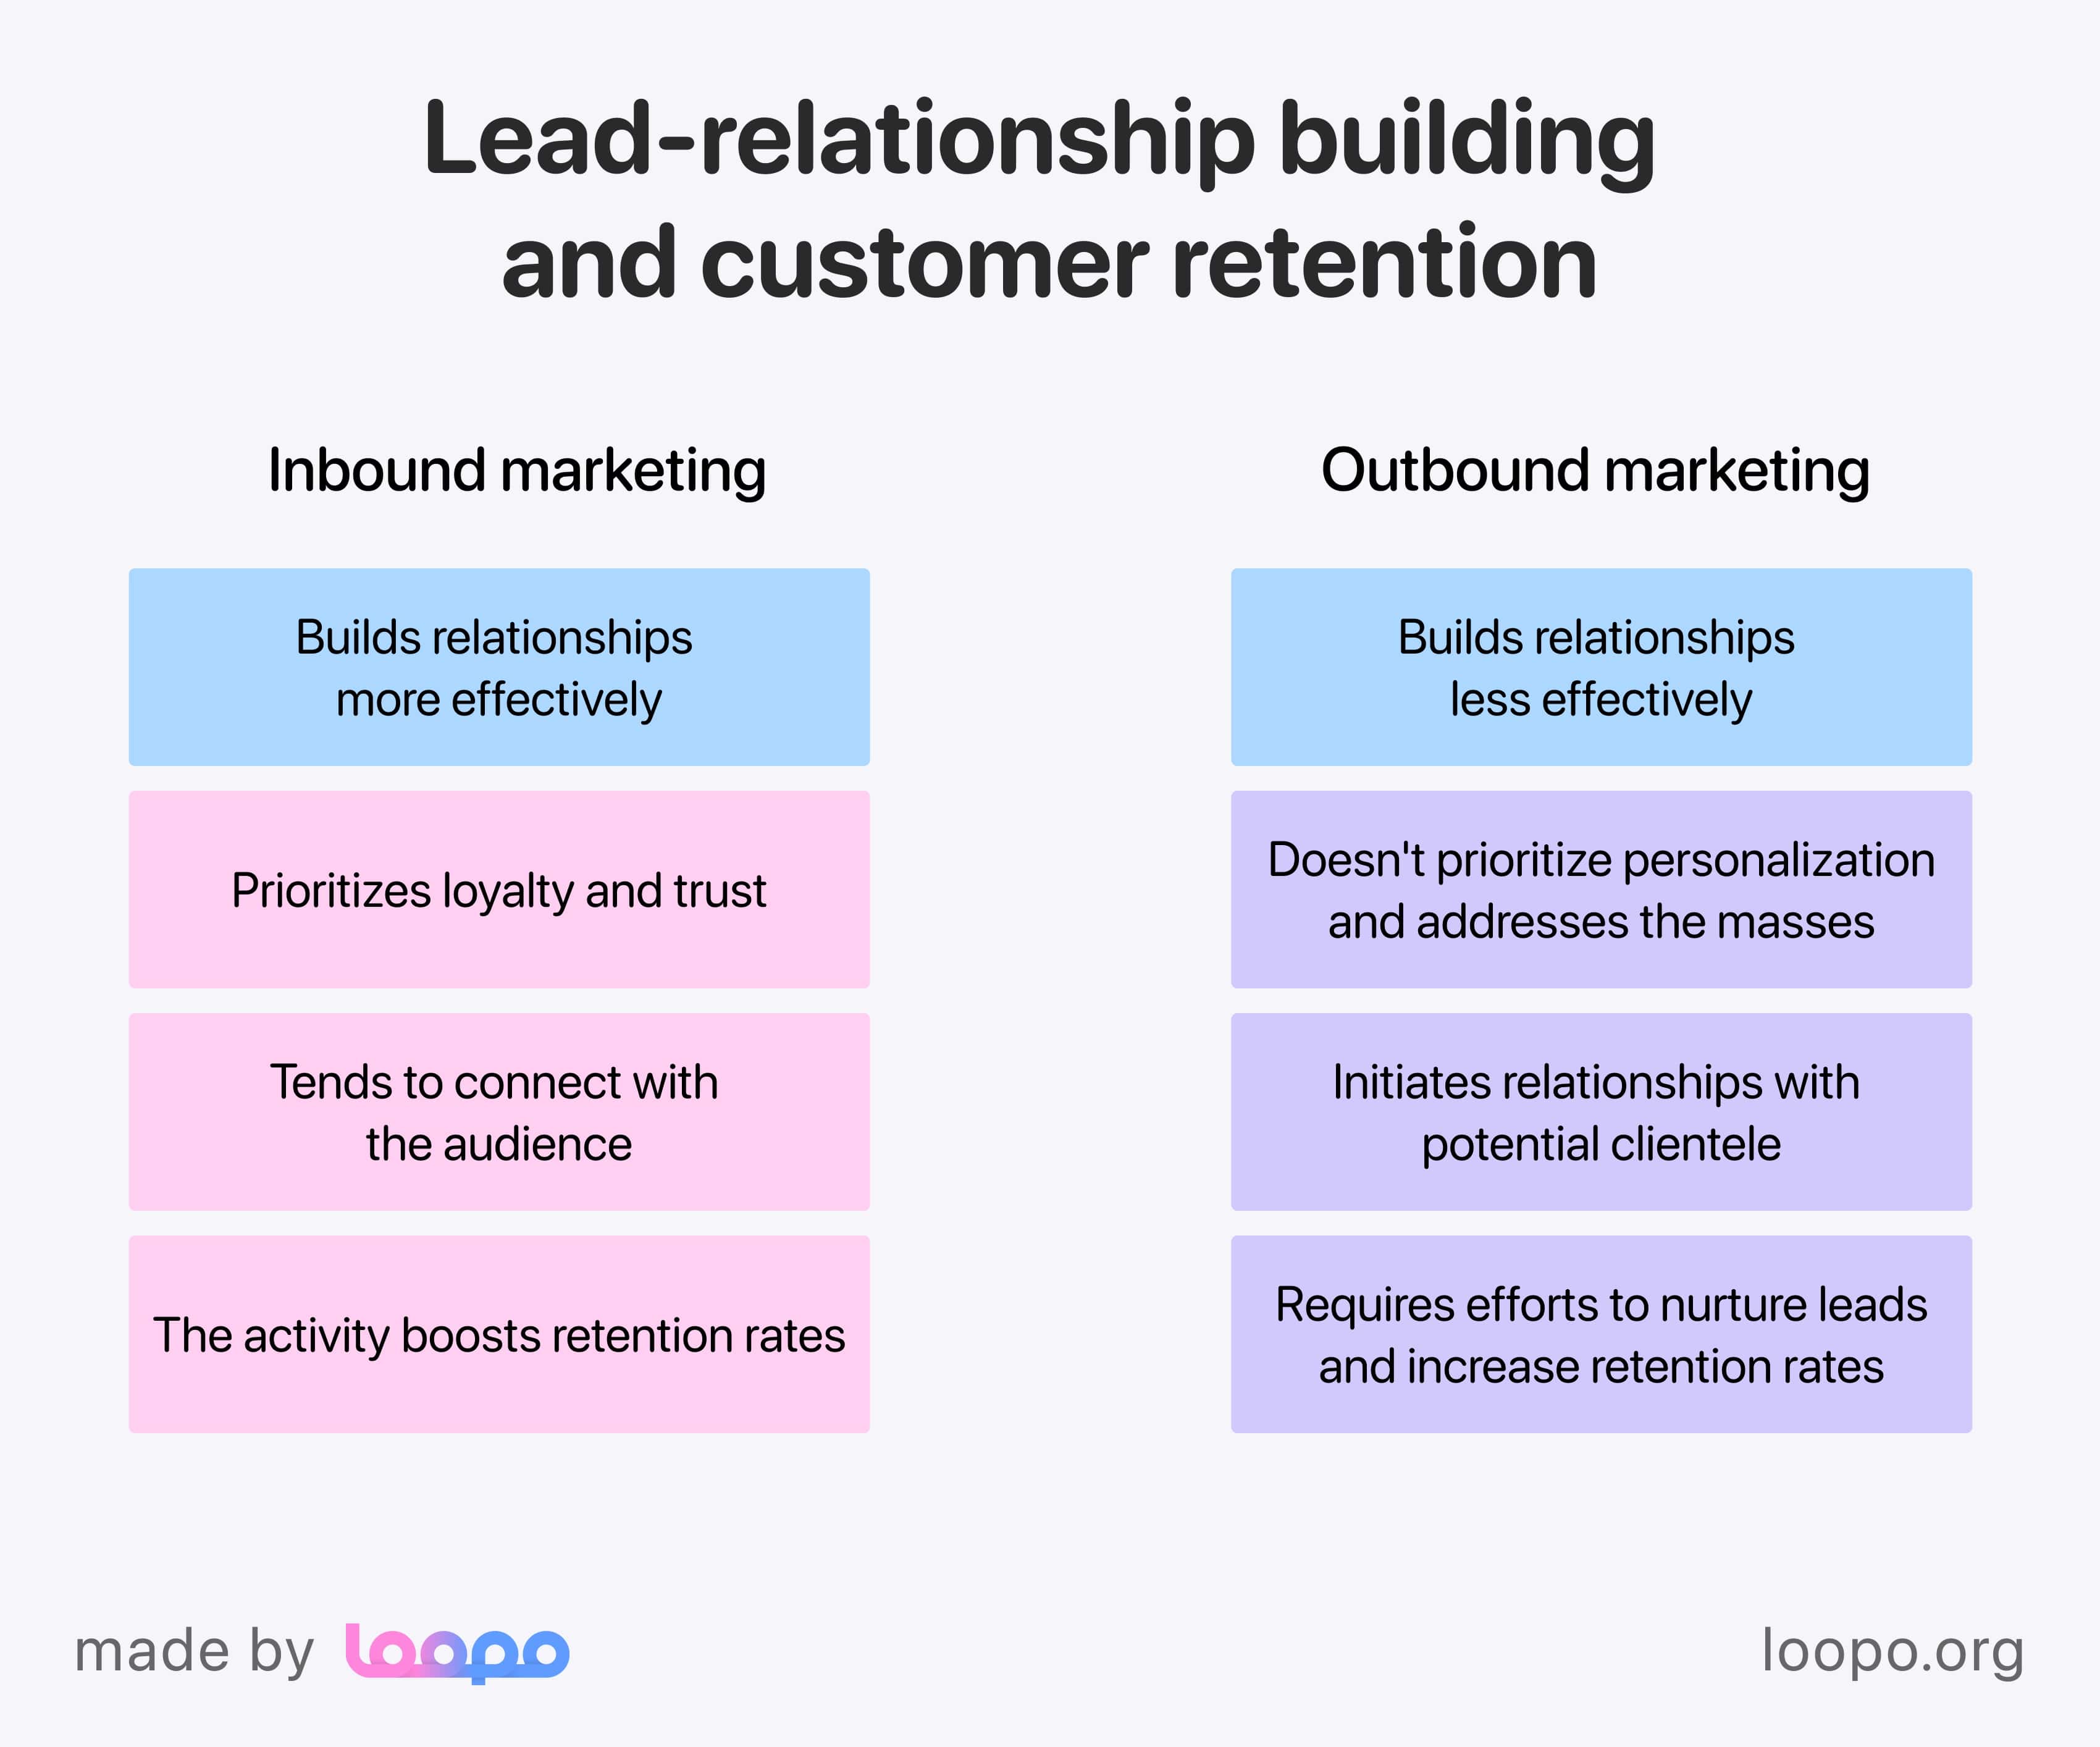 Retention and relationship building in inbound and outbound marketing